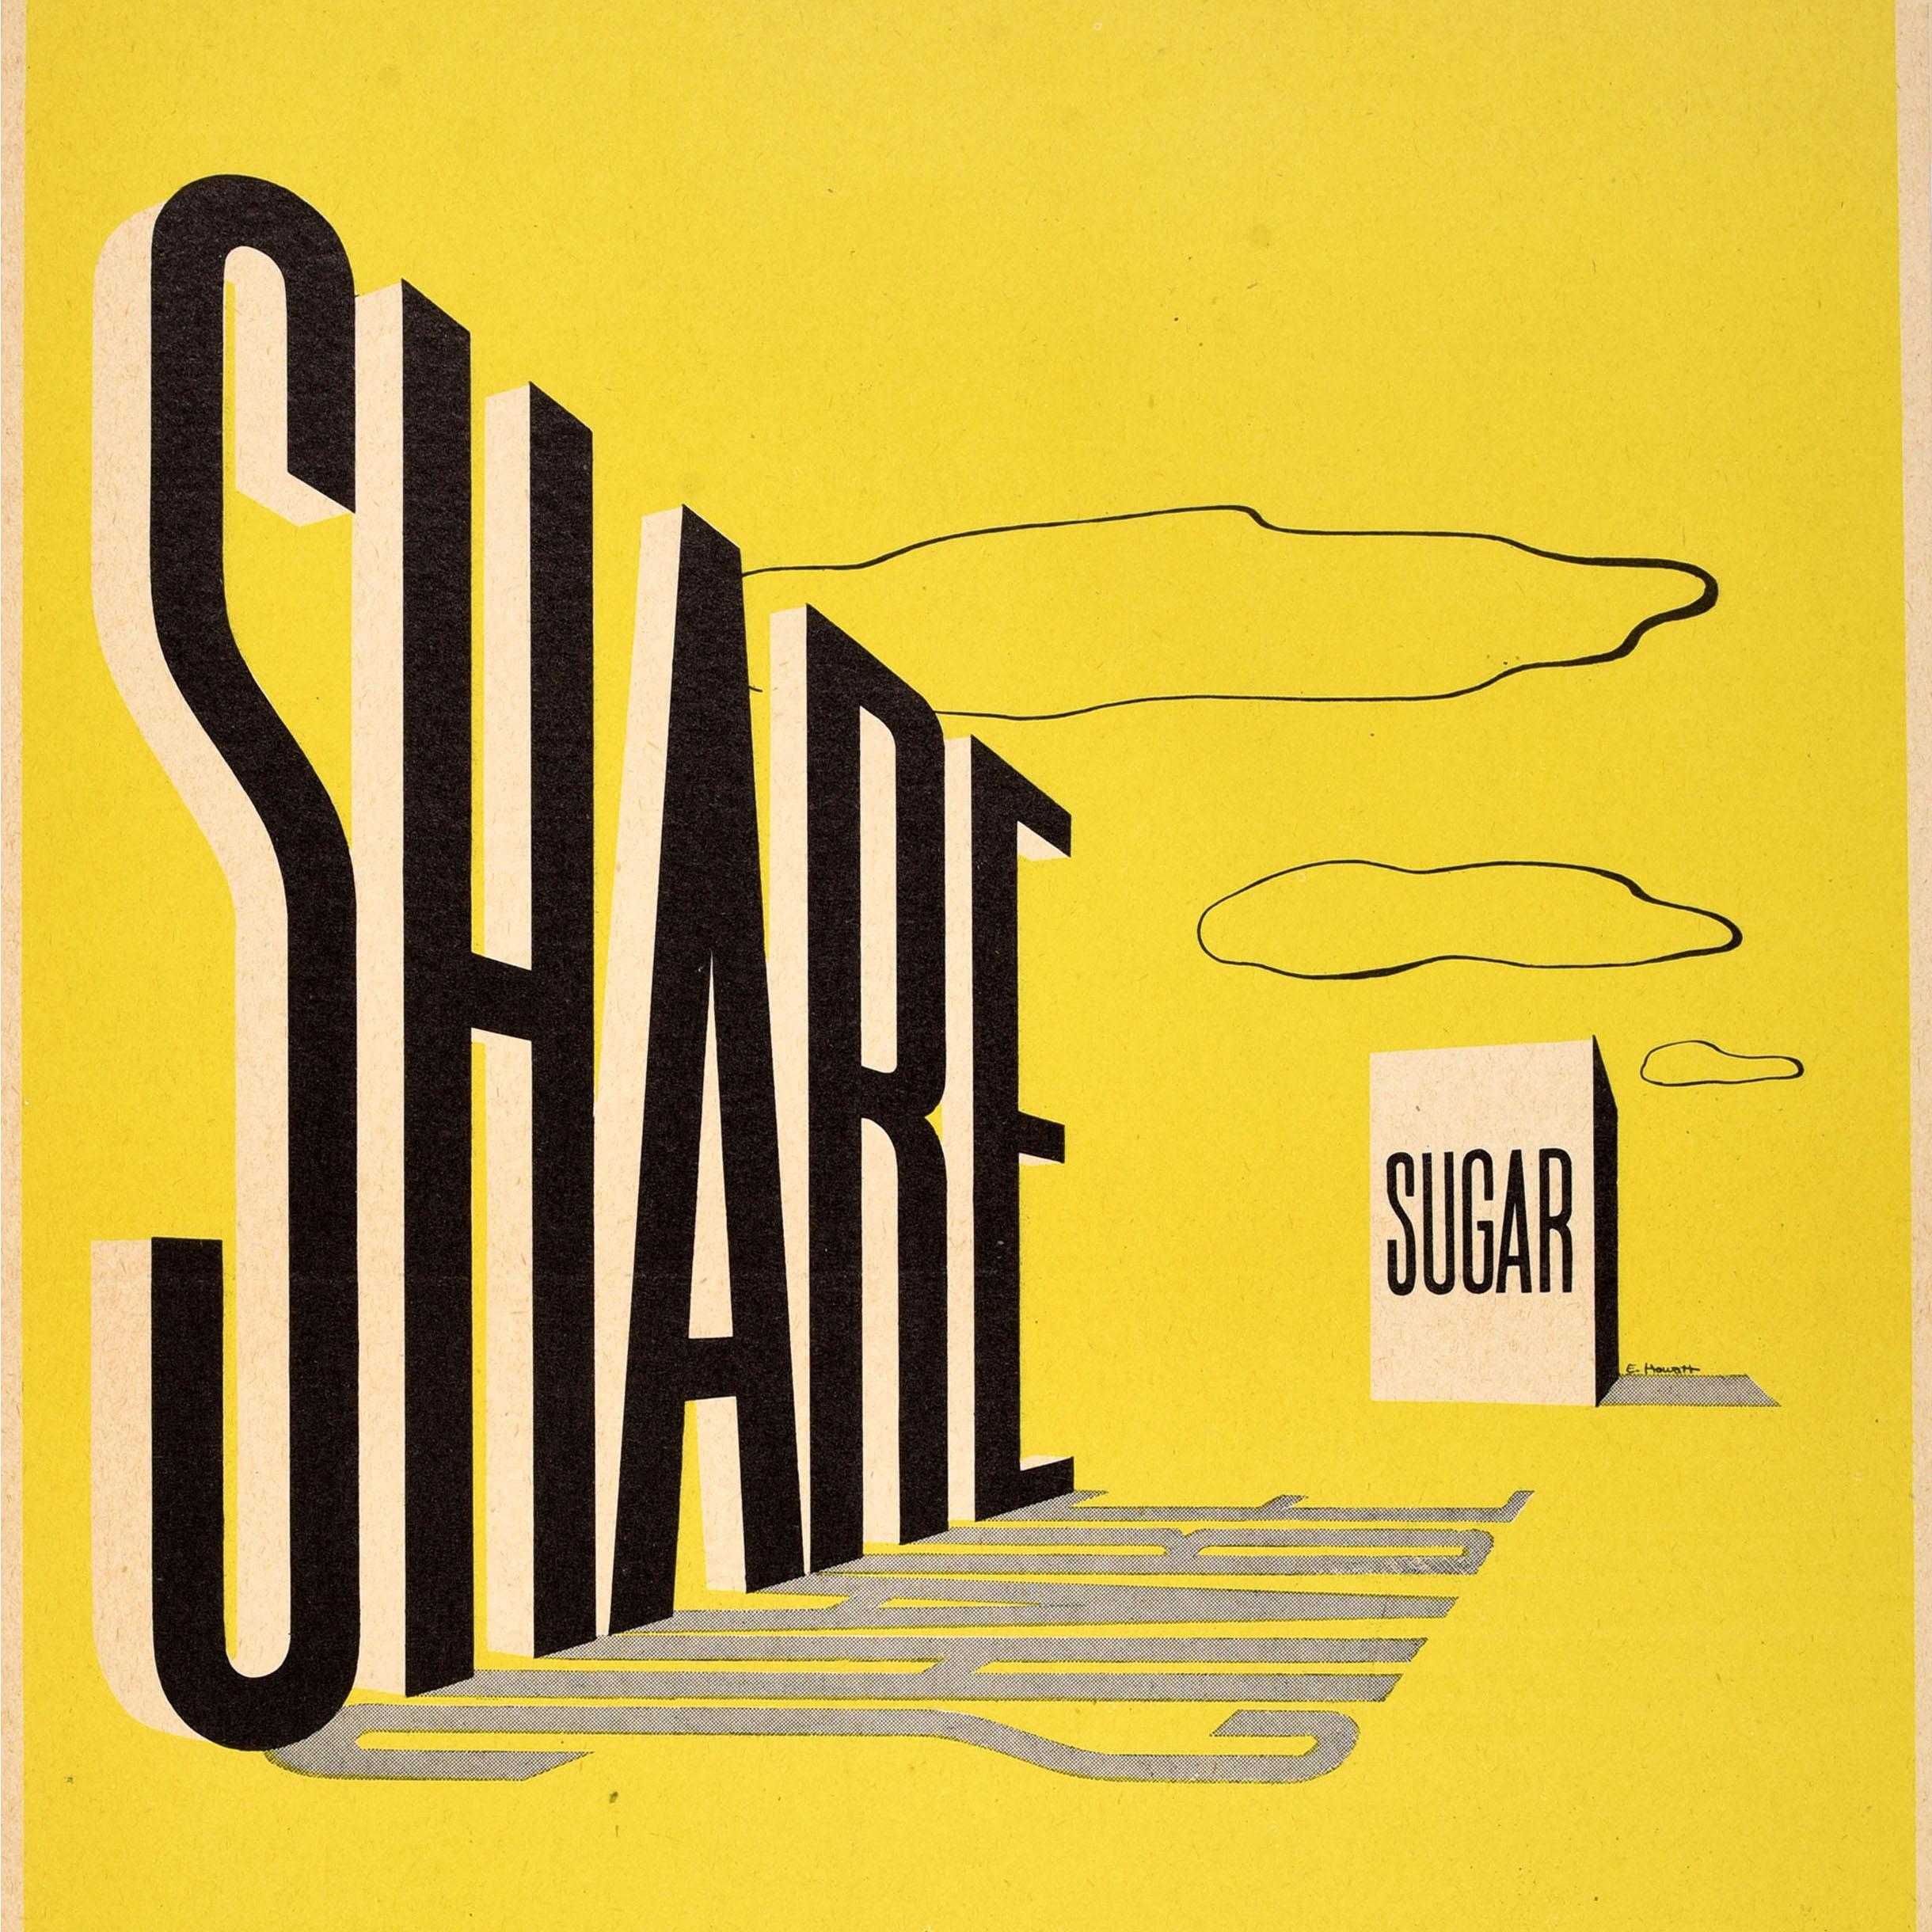 Original vintage World War Two Propaganda poster Share Sugar - It's war-scarce its war-necessary - Design features a box of sugar on a yellow background with bold black lettering. Issued by the United states Office of Price Administration. Printed